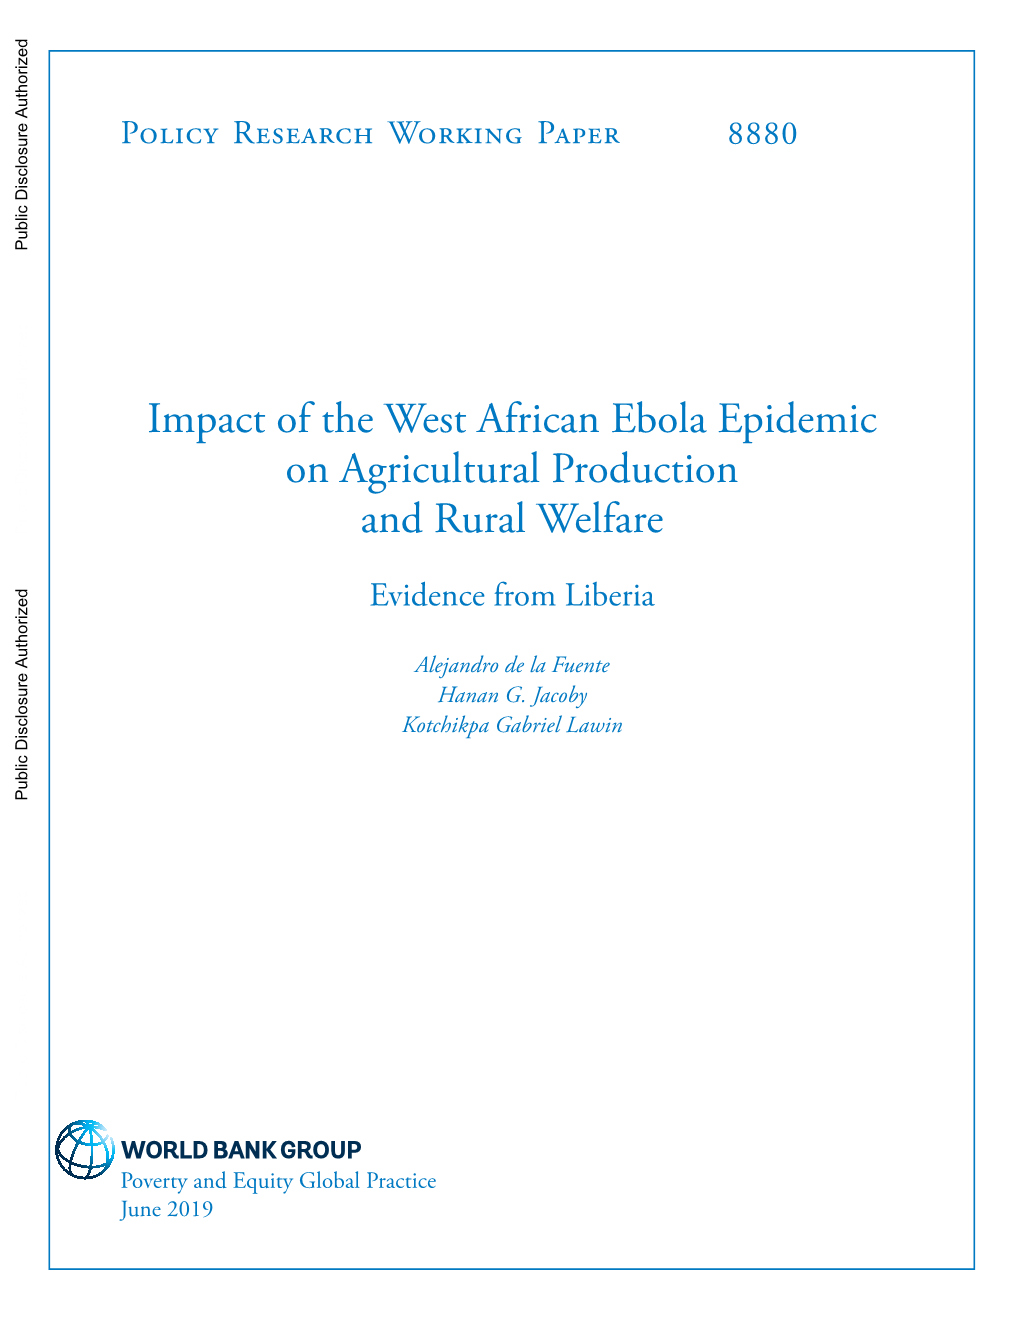 Impact of the West African Ebola Epidemic on Agricultural Production and Rural Welfare: Evidence from Liberia1